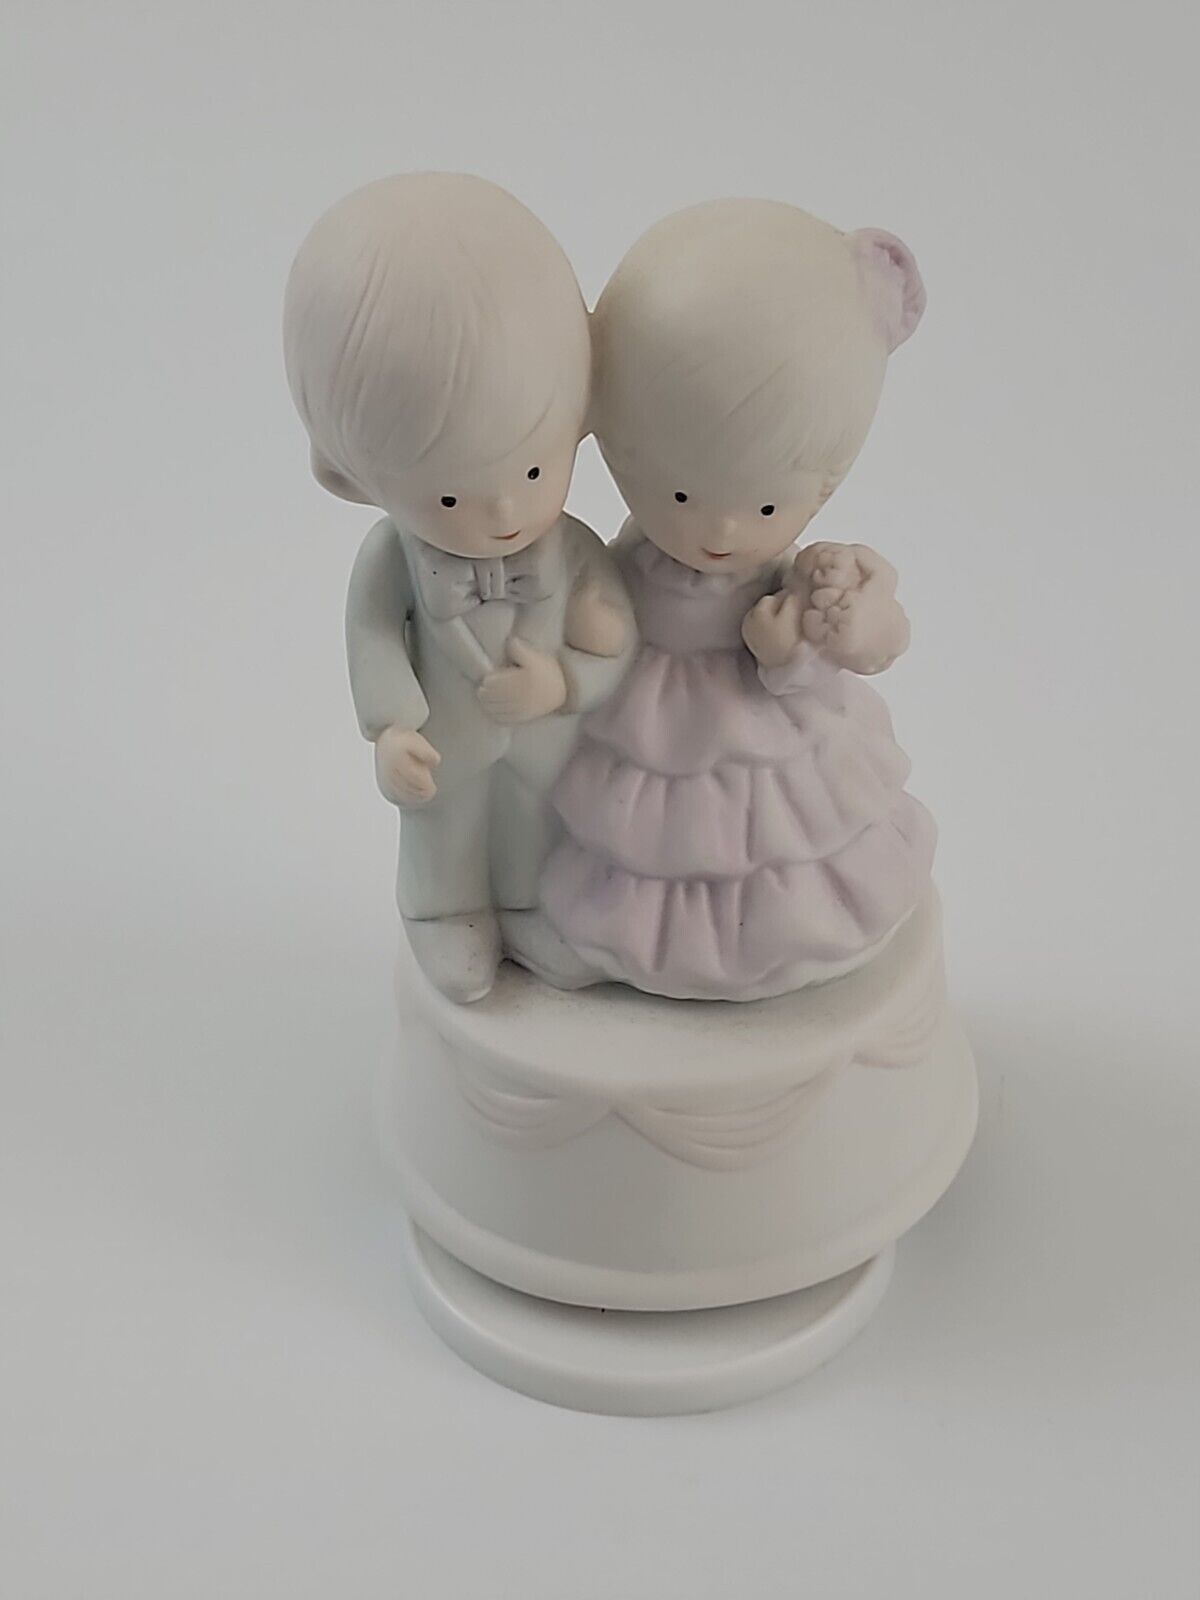  PRECIOUS MOMENTS MUSICAL FIGURINE BOY AND GIRL , HUSBAND WIFE MARRIED MARRIAGE 